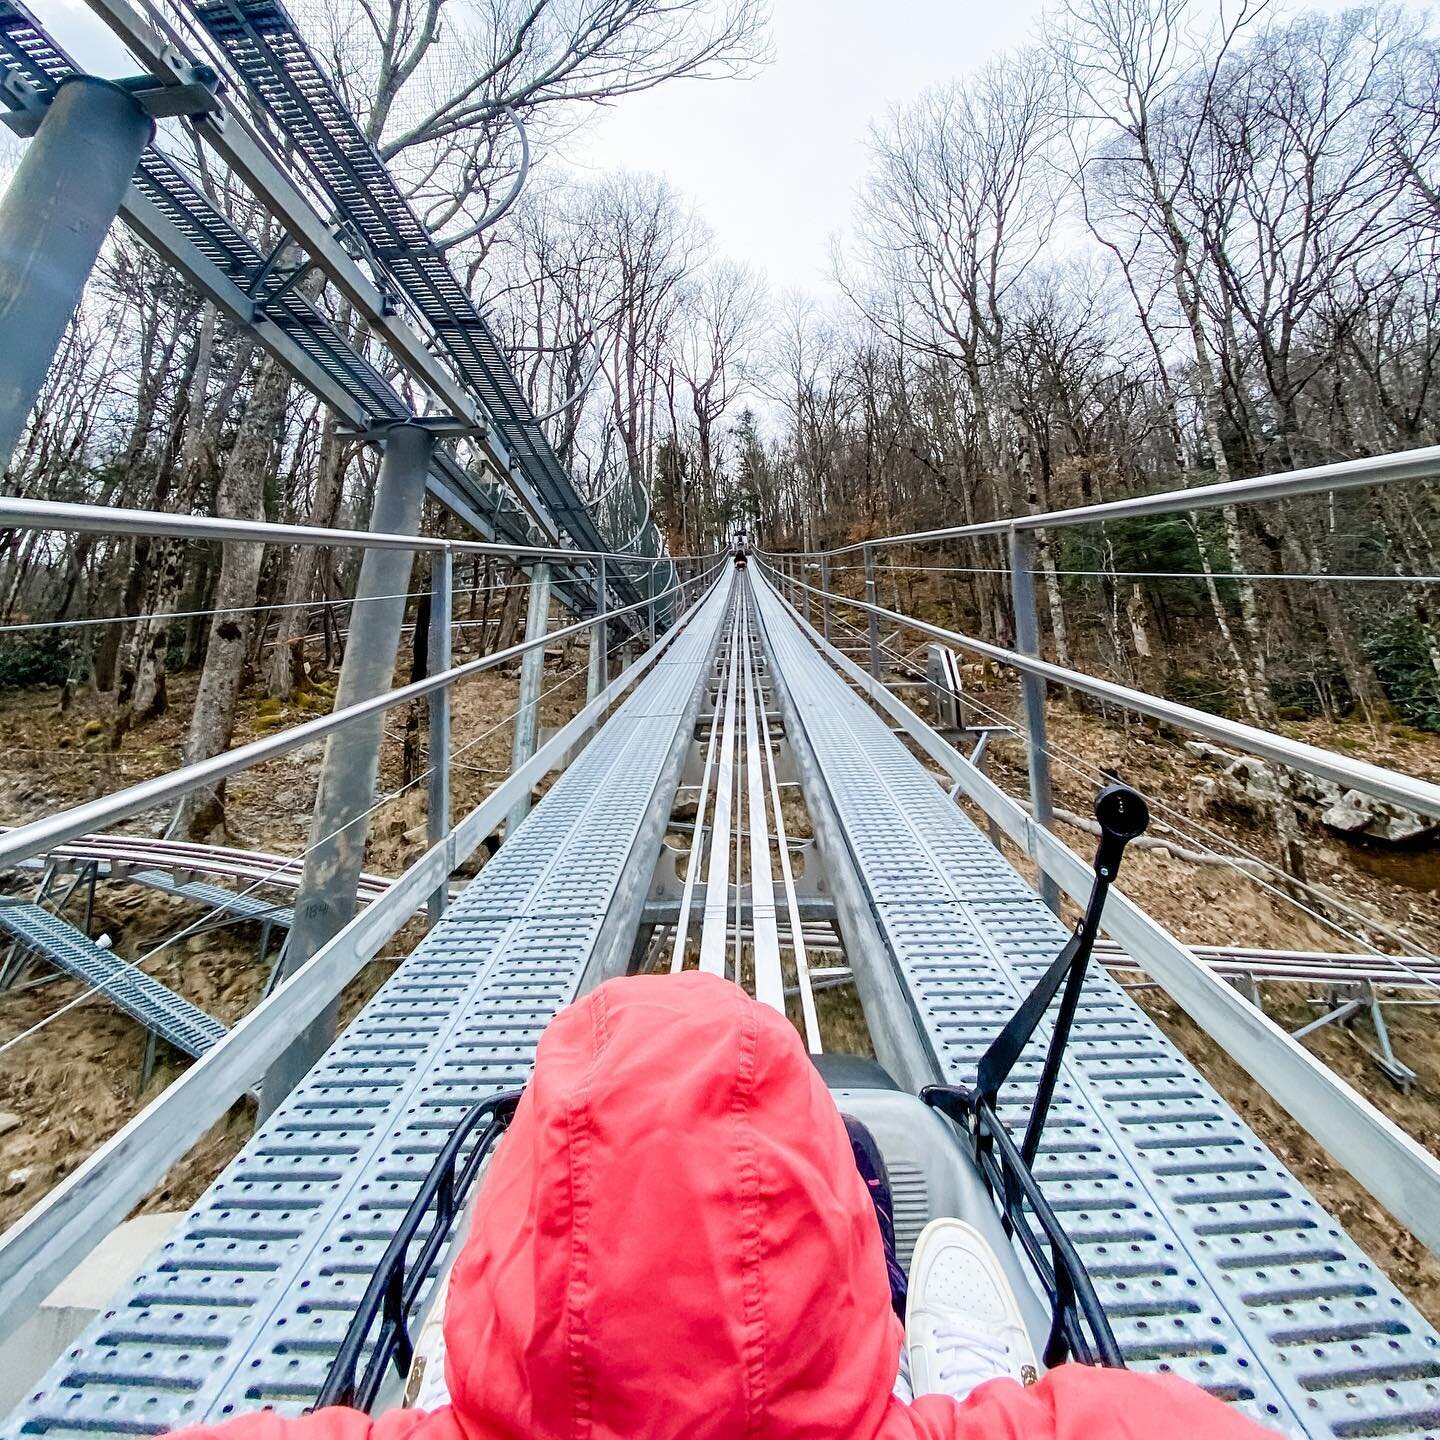 Riding @wildernessrunalpinecoaster is the BEST way to start your week!  We decided to check it out this morning for the first time and it was amazing!  We highly recommend you checking this out during your stay with us.  You&rsquo;ll need to make a r